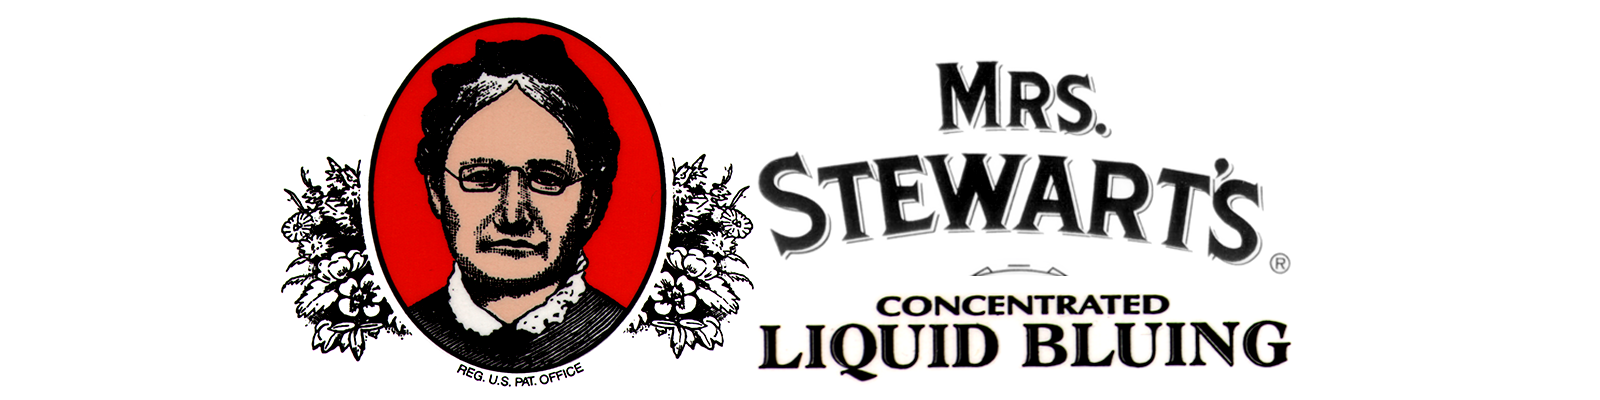 Pack of 2 Bottles - Mrs. Stewart's Concentrated Liquid Bluing - 8 oz ea